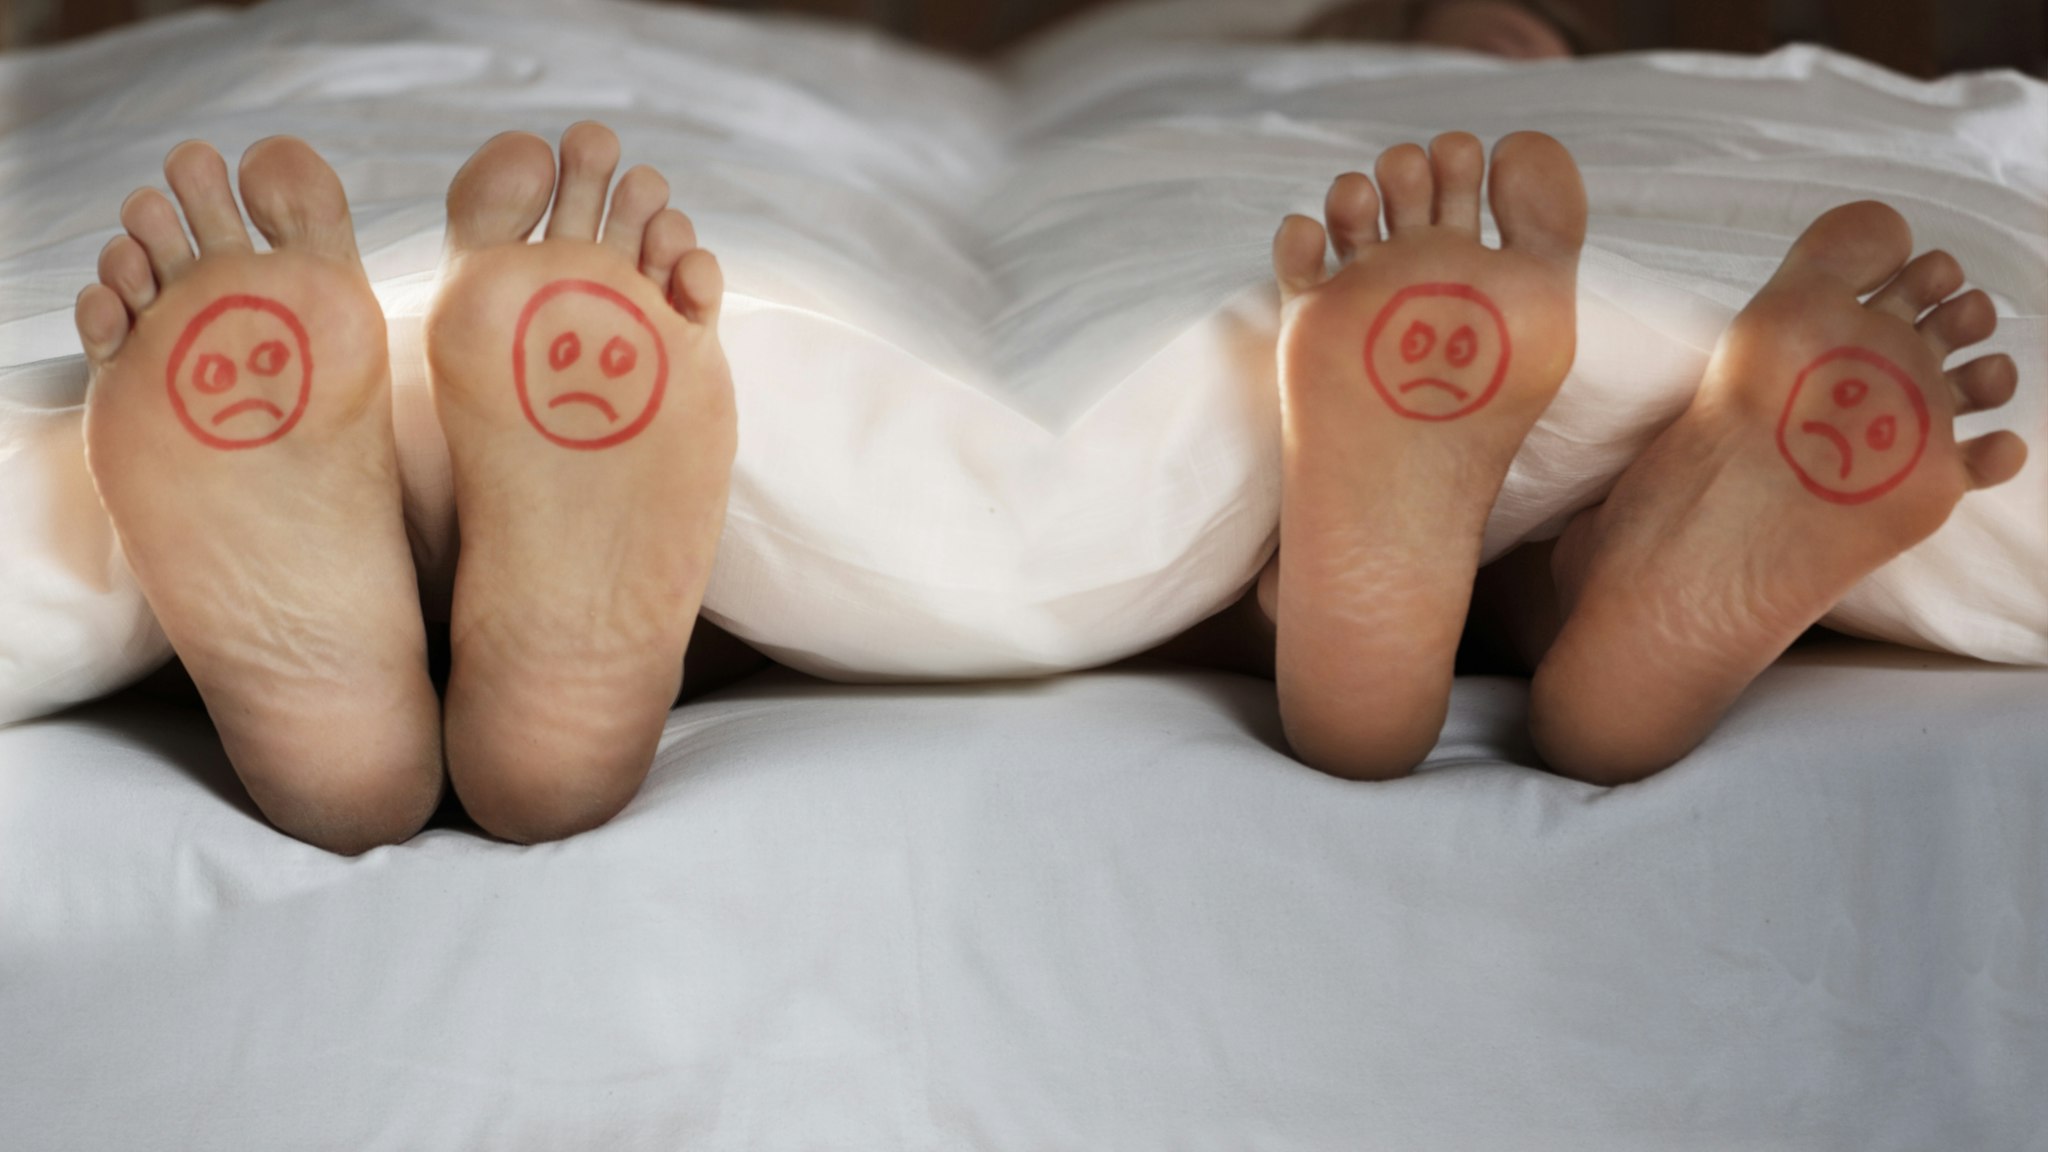 Feet at end of bed with sad faces drawn on - stock photo